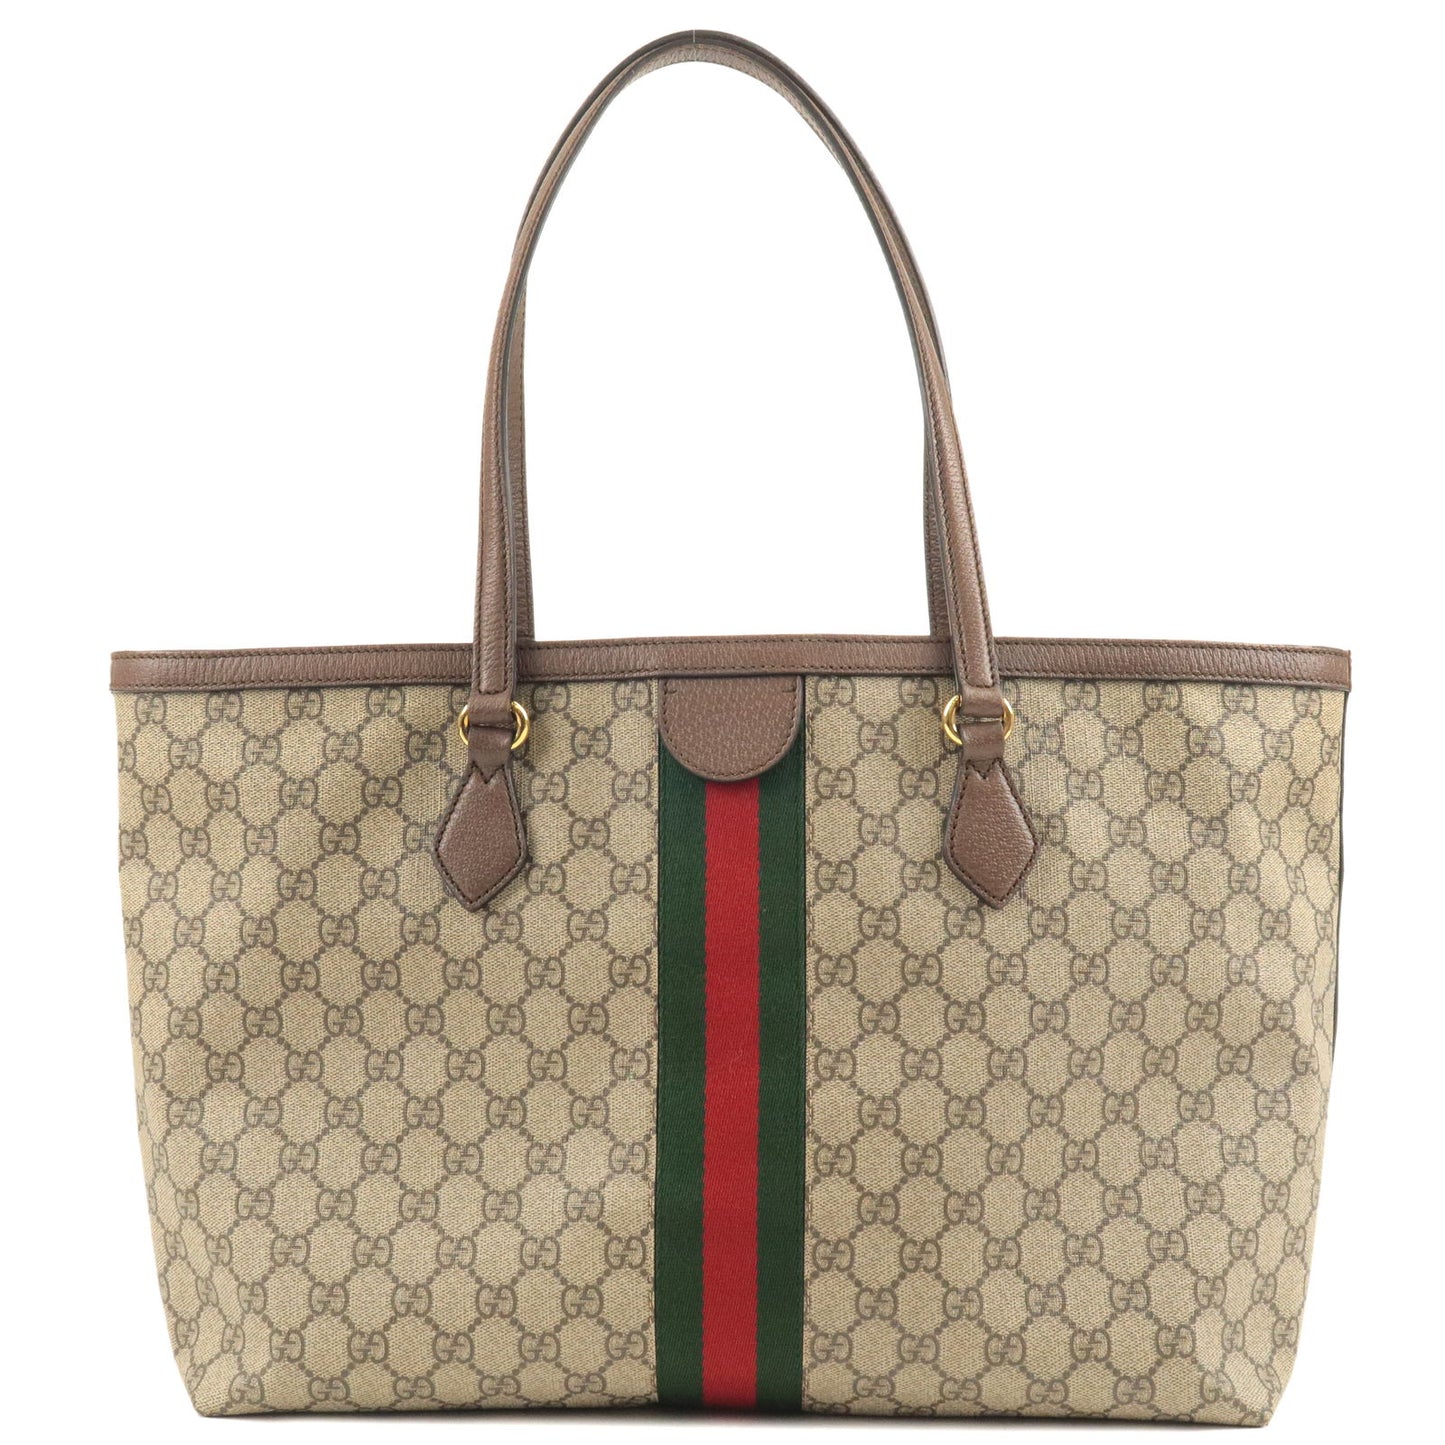 GUCCI Ophidia GG Supreme Leather Tote Bag Beige Brown 631685